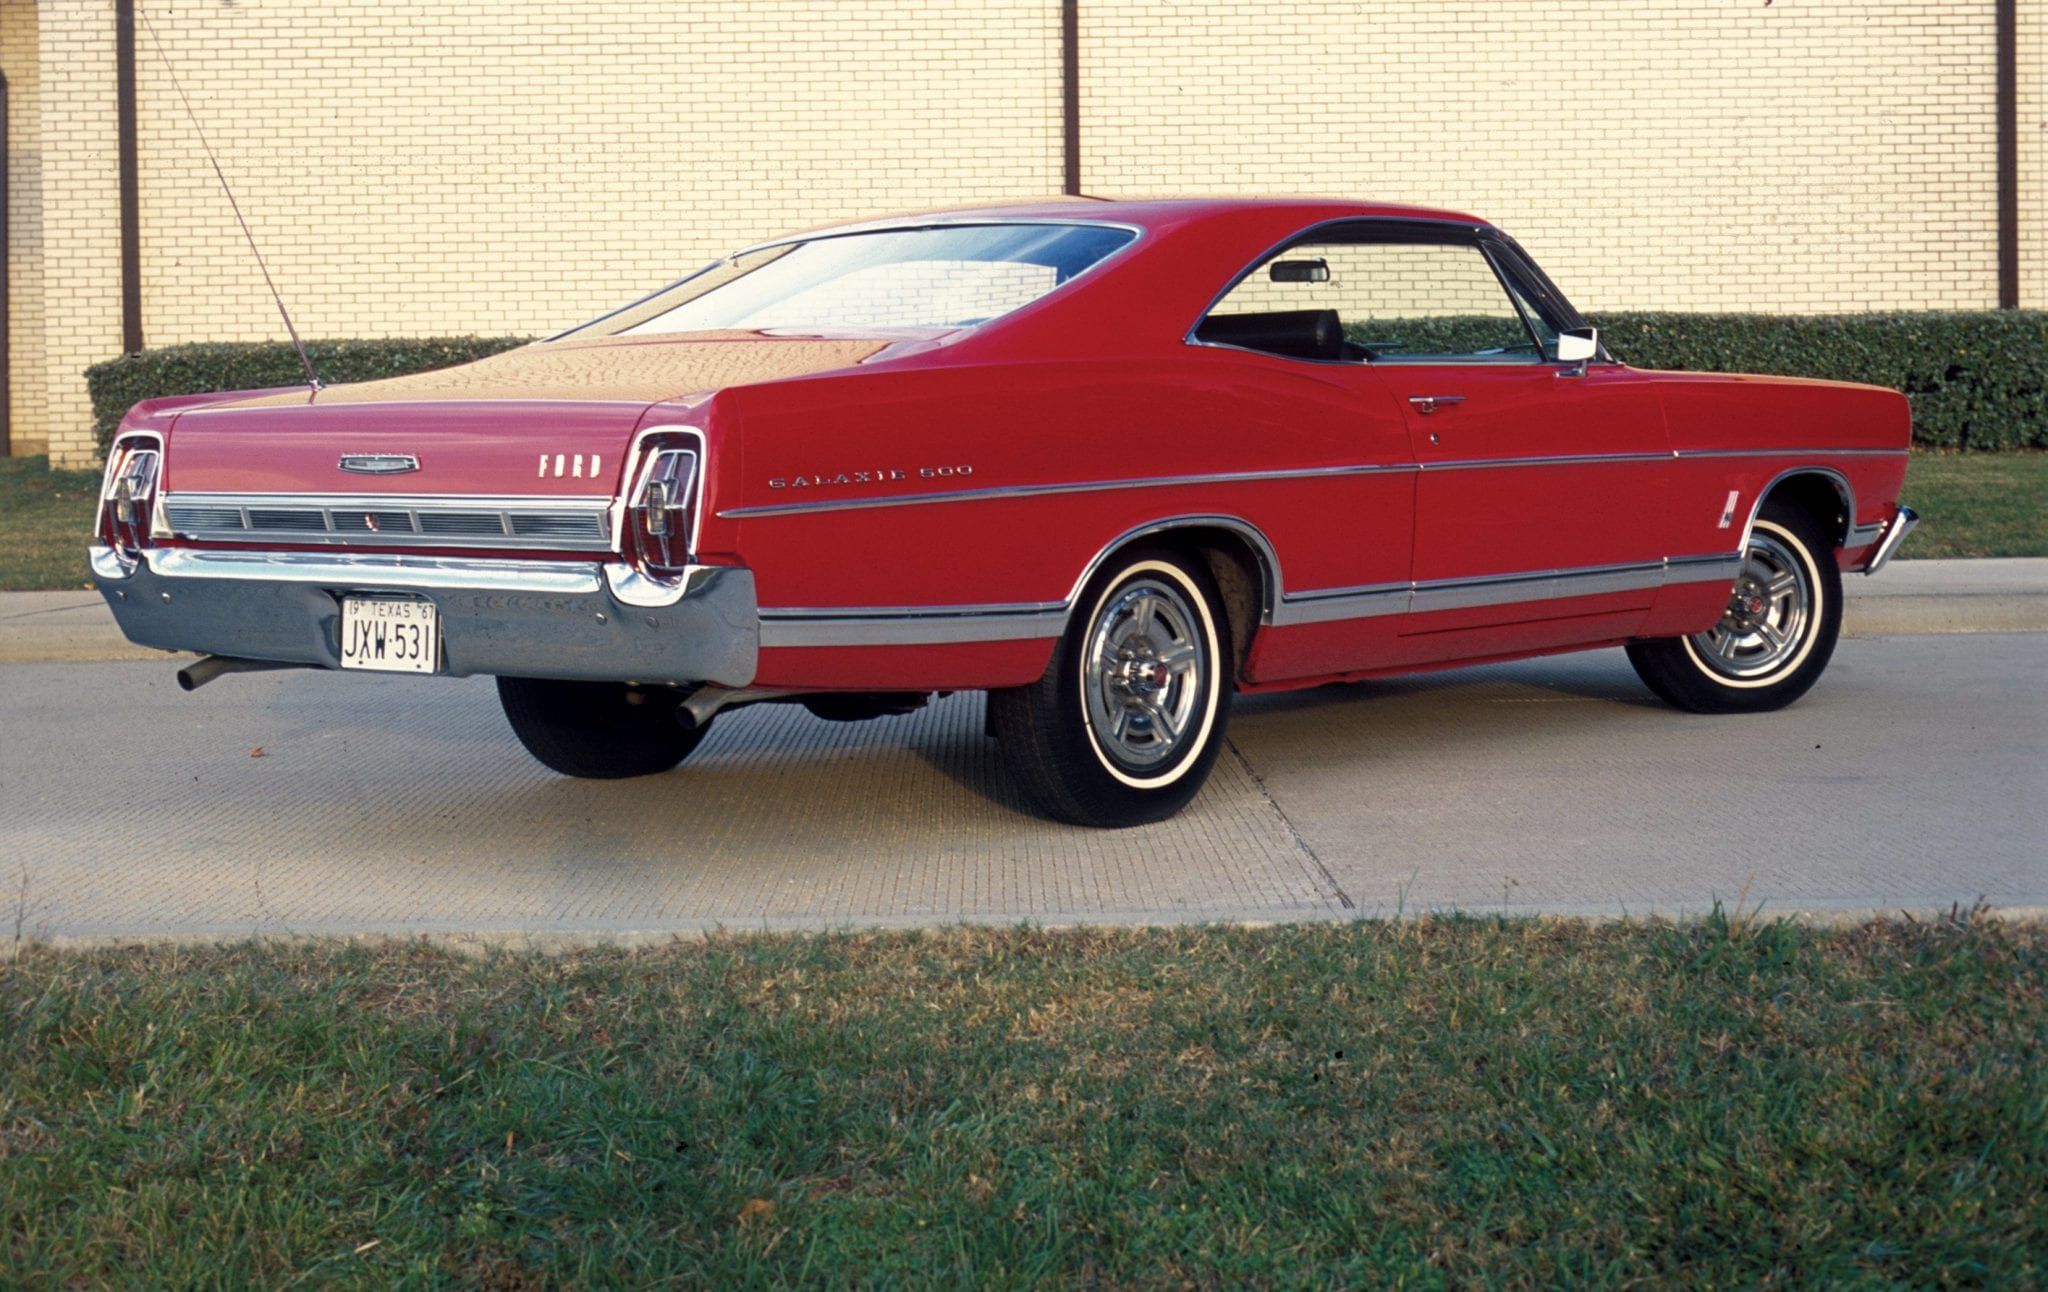 Red Ford Galaxie in driveway, back view